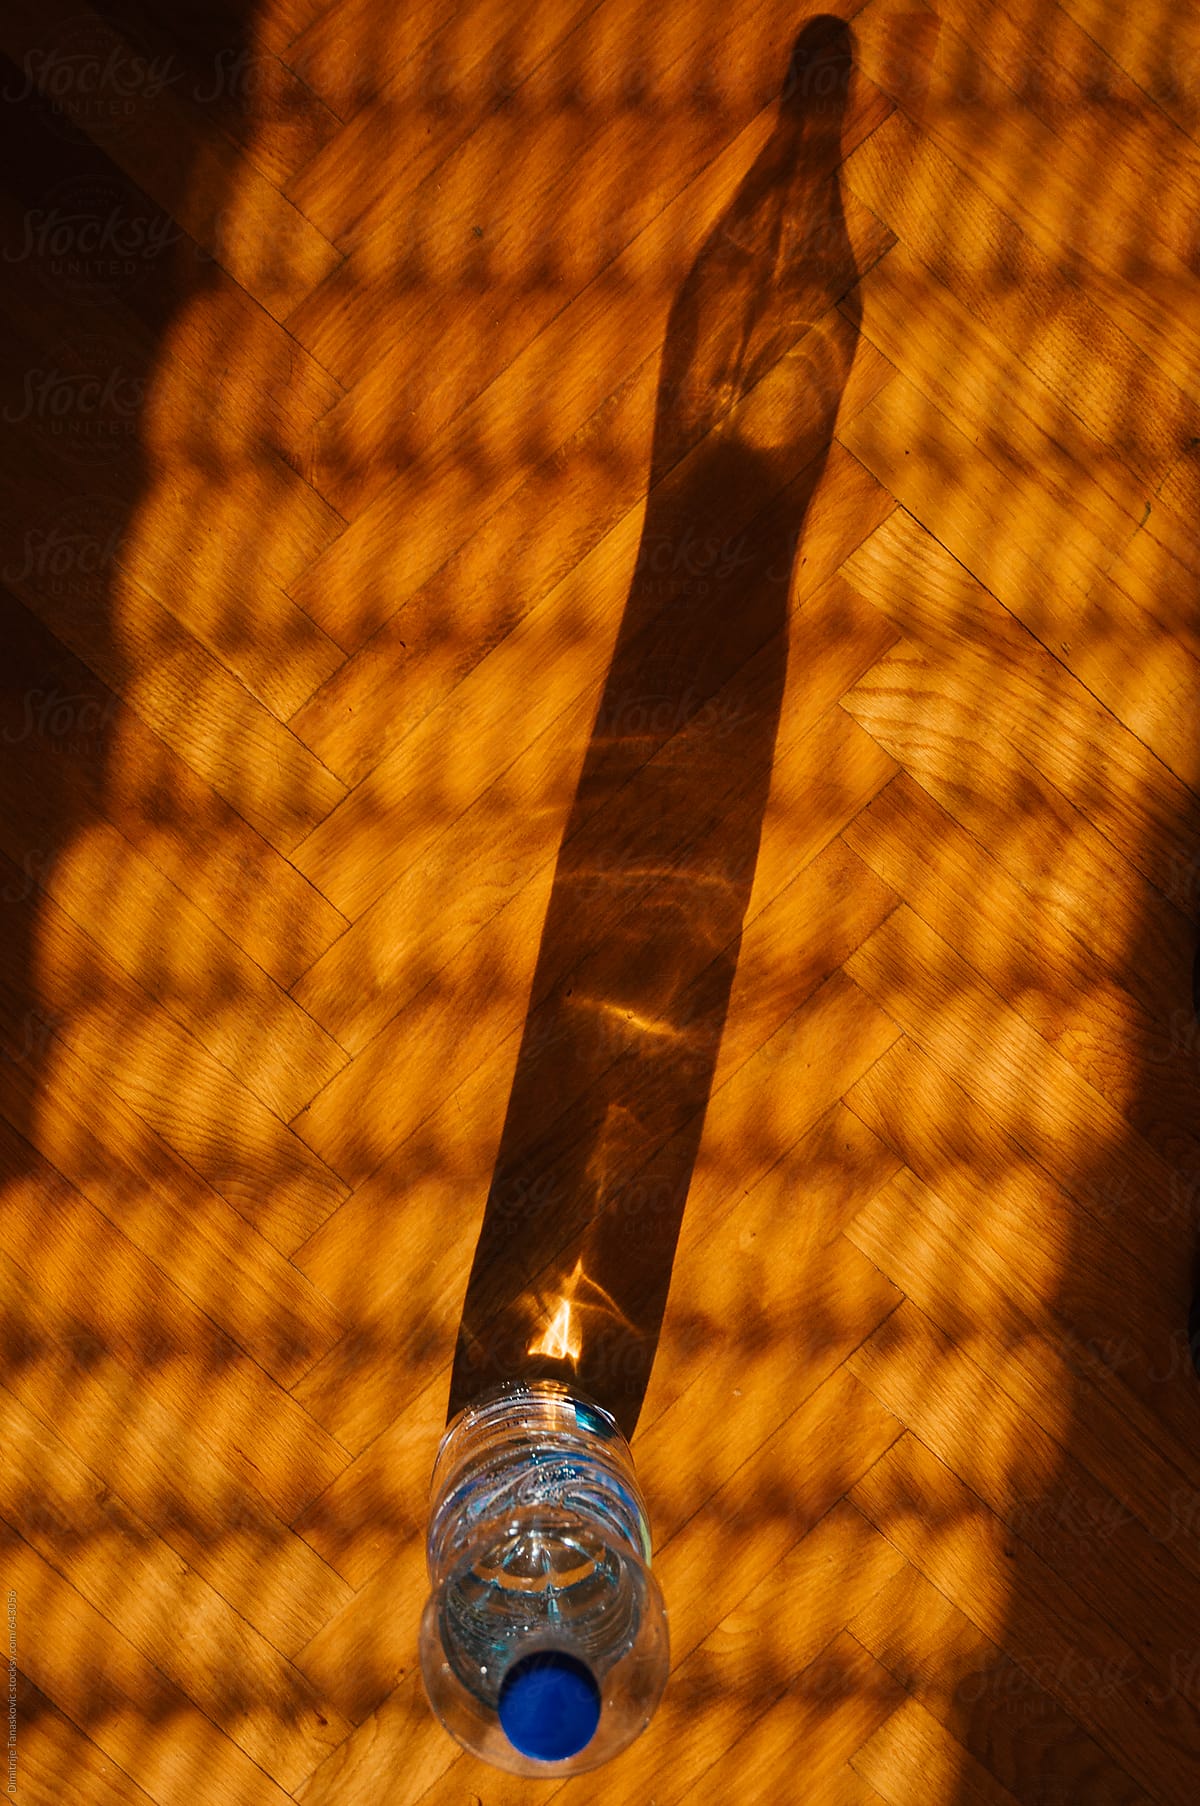 Bottle of water on the floor lit with sun shining through the window